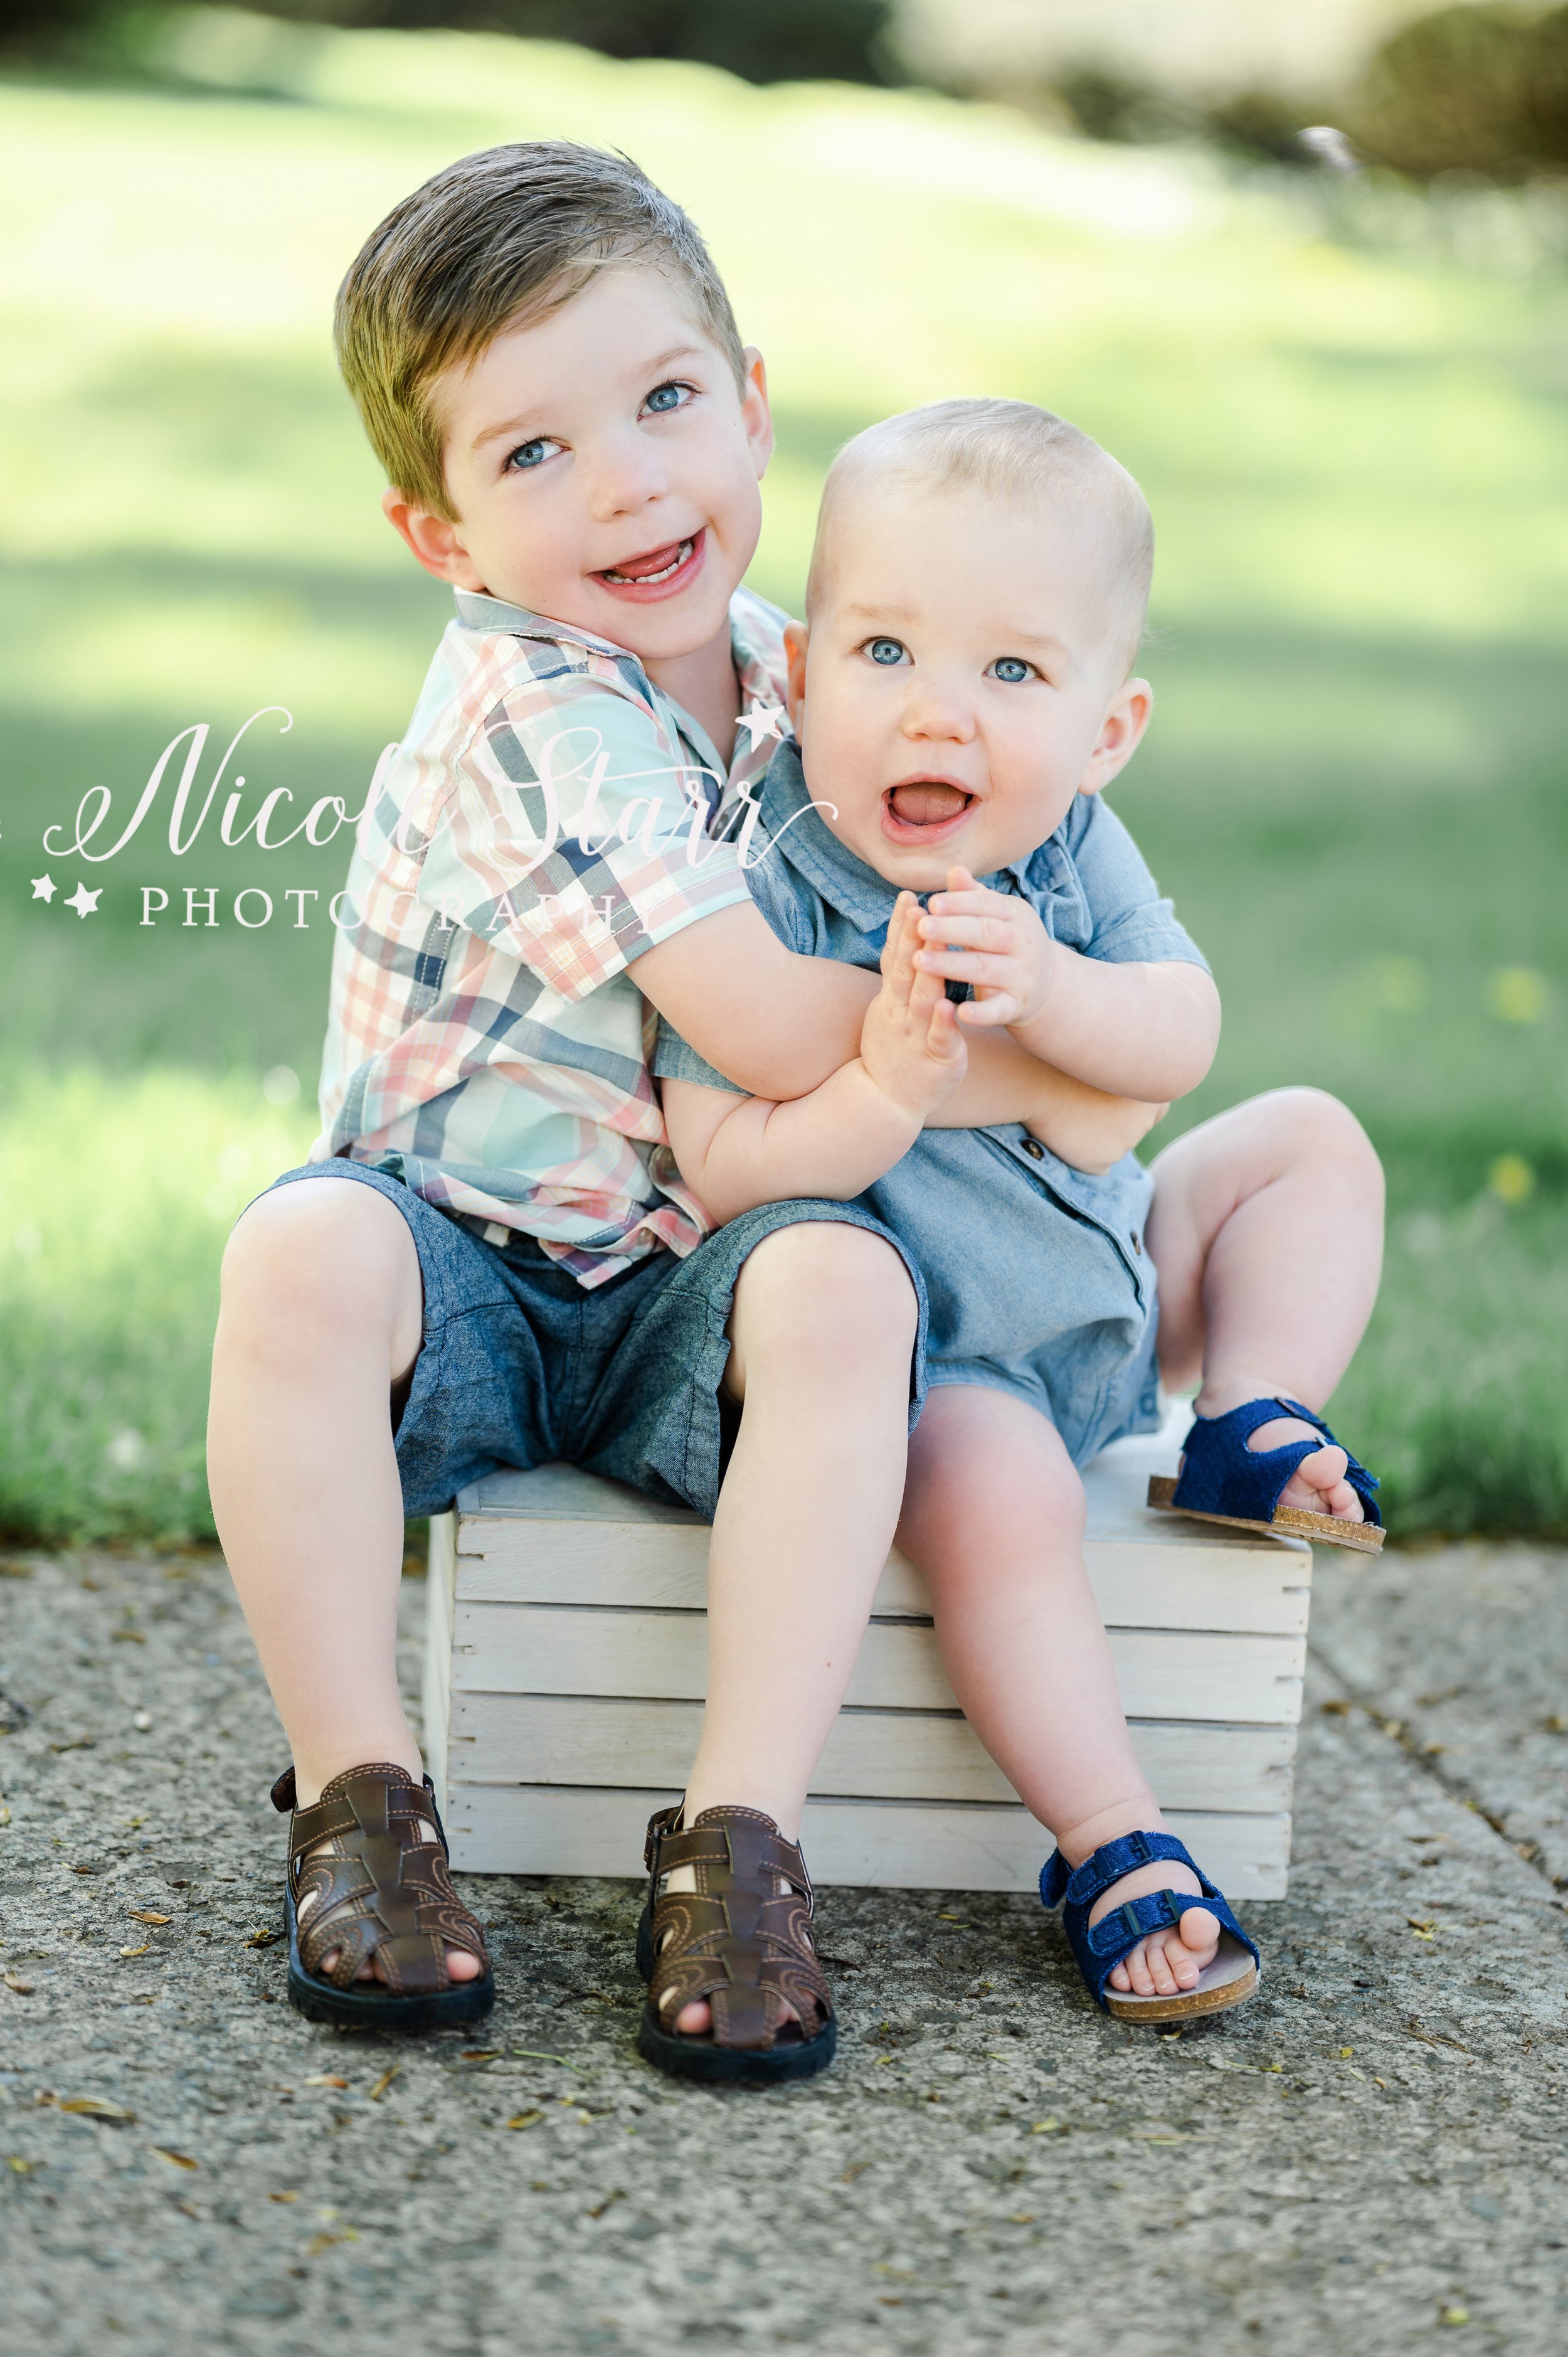 Tips to Organize and Print Your Family's Photo Albums — Saratoga Springs  Baby Photographer, Nicole Starr Photography